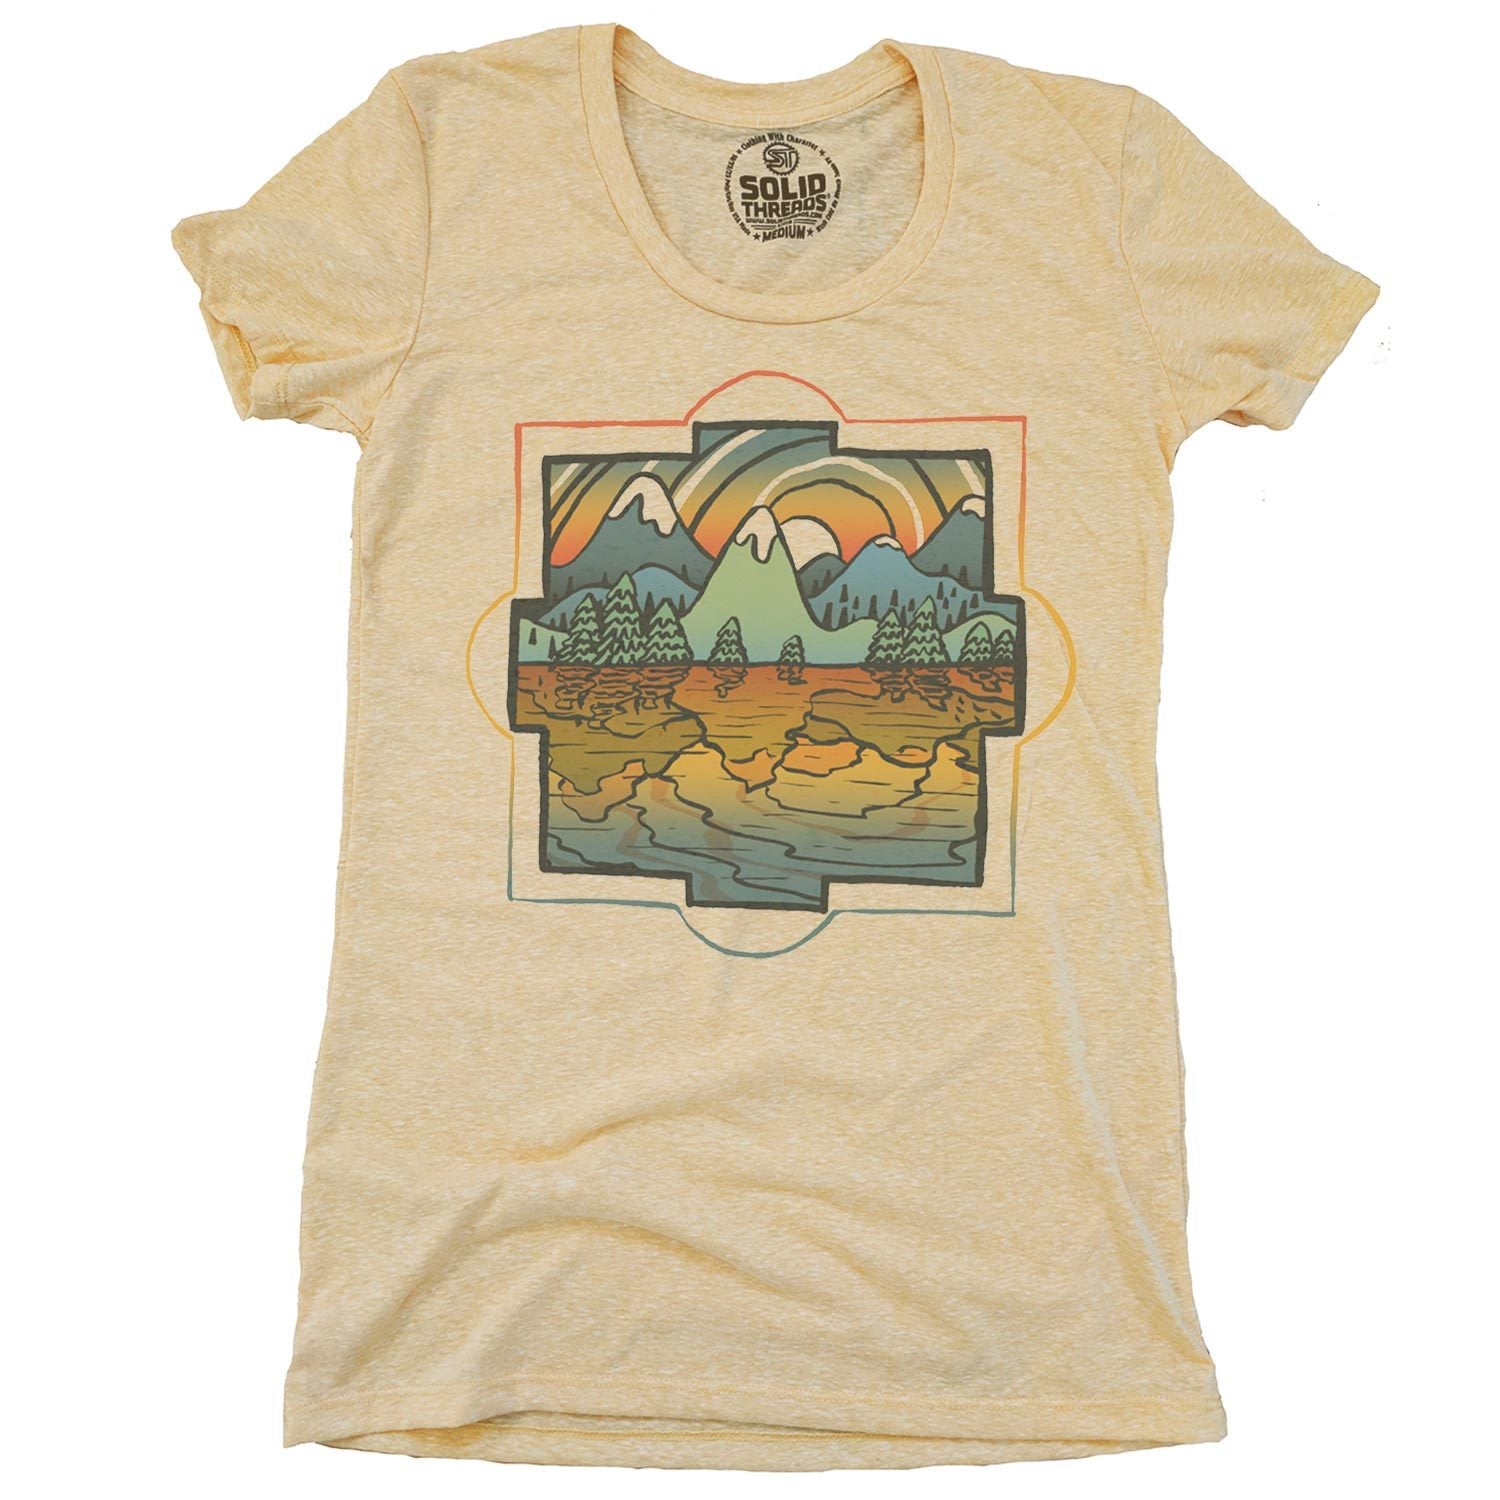 Women's Reflections Vintage Nature Graphic Tee | Retro Colorful Mountains T-Shirt | Solid Threads